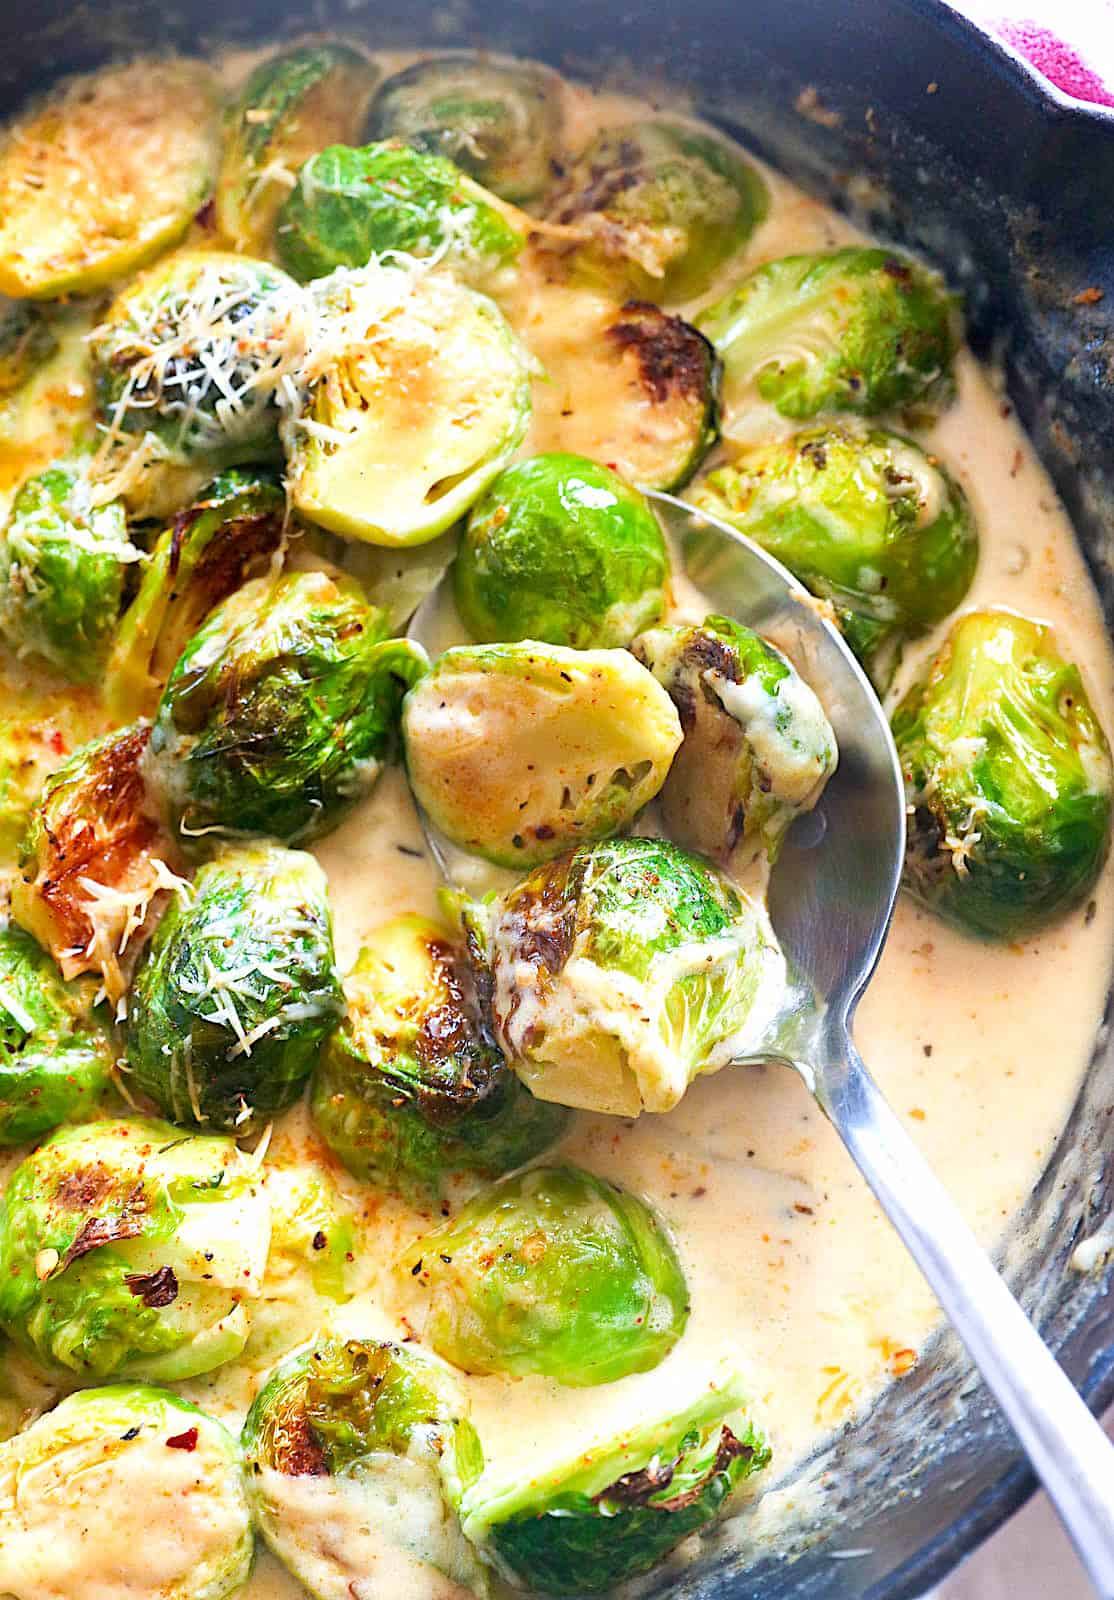 Enjoying creamy Brussels sprouts for healthy comfort food